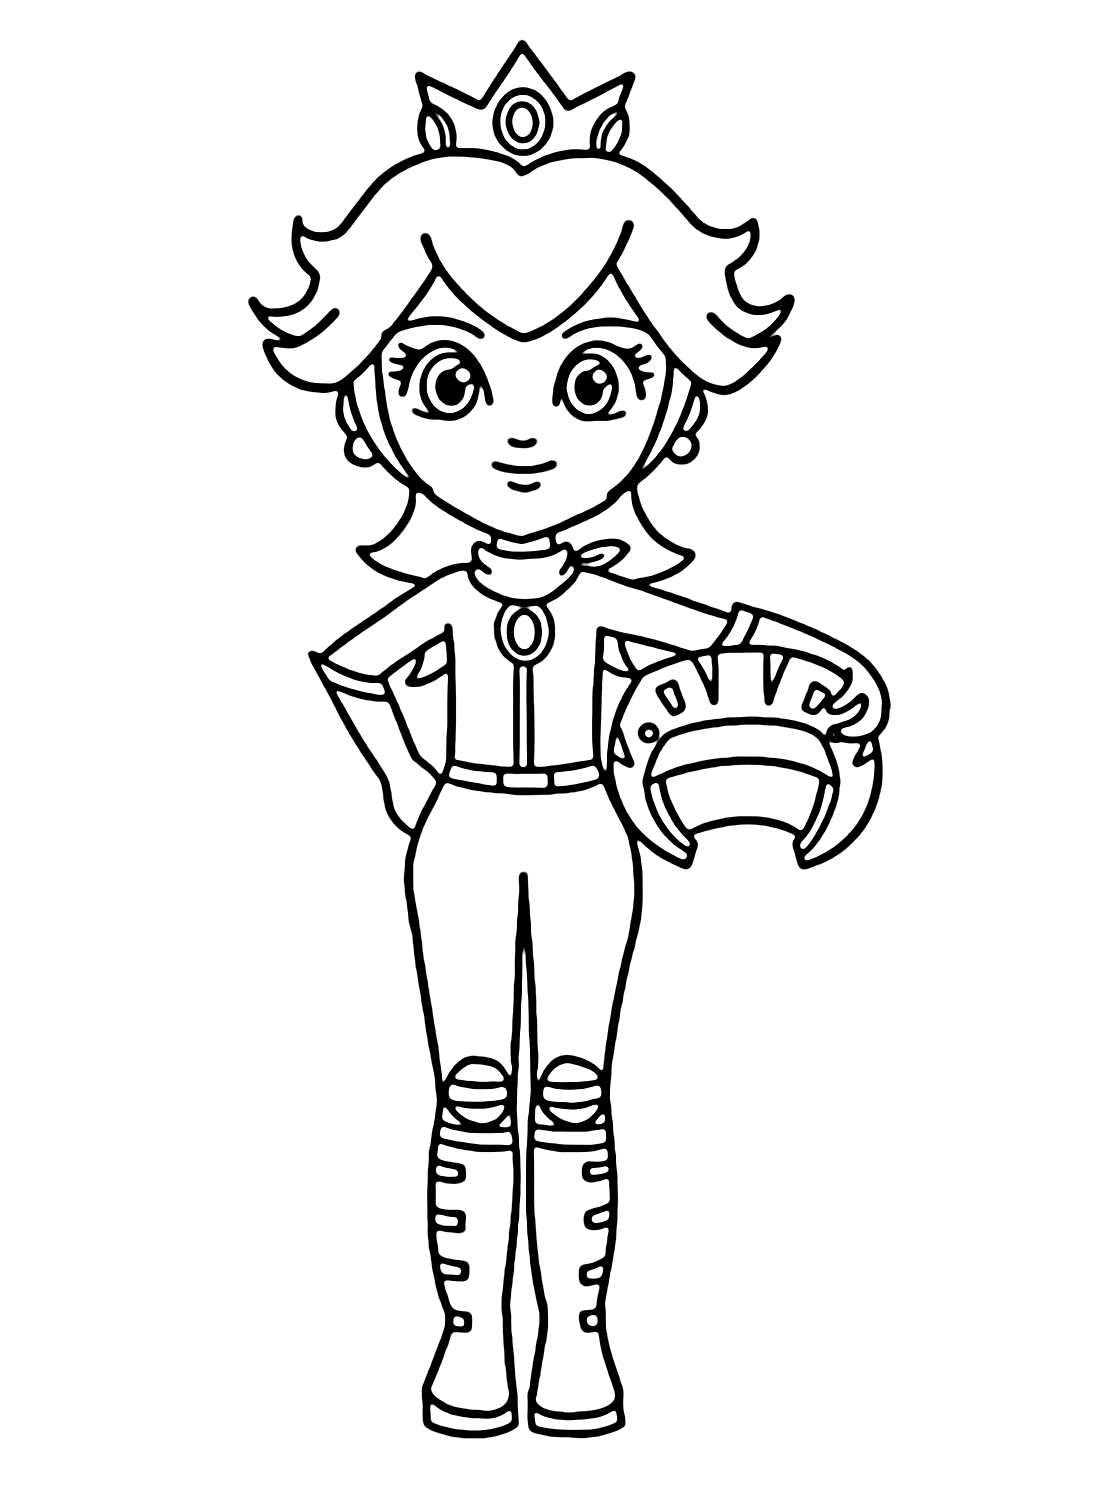 toad mario kart coloring pages